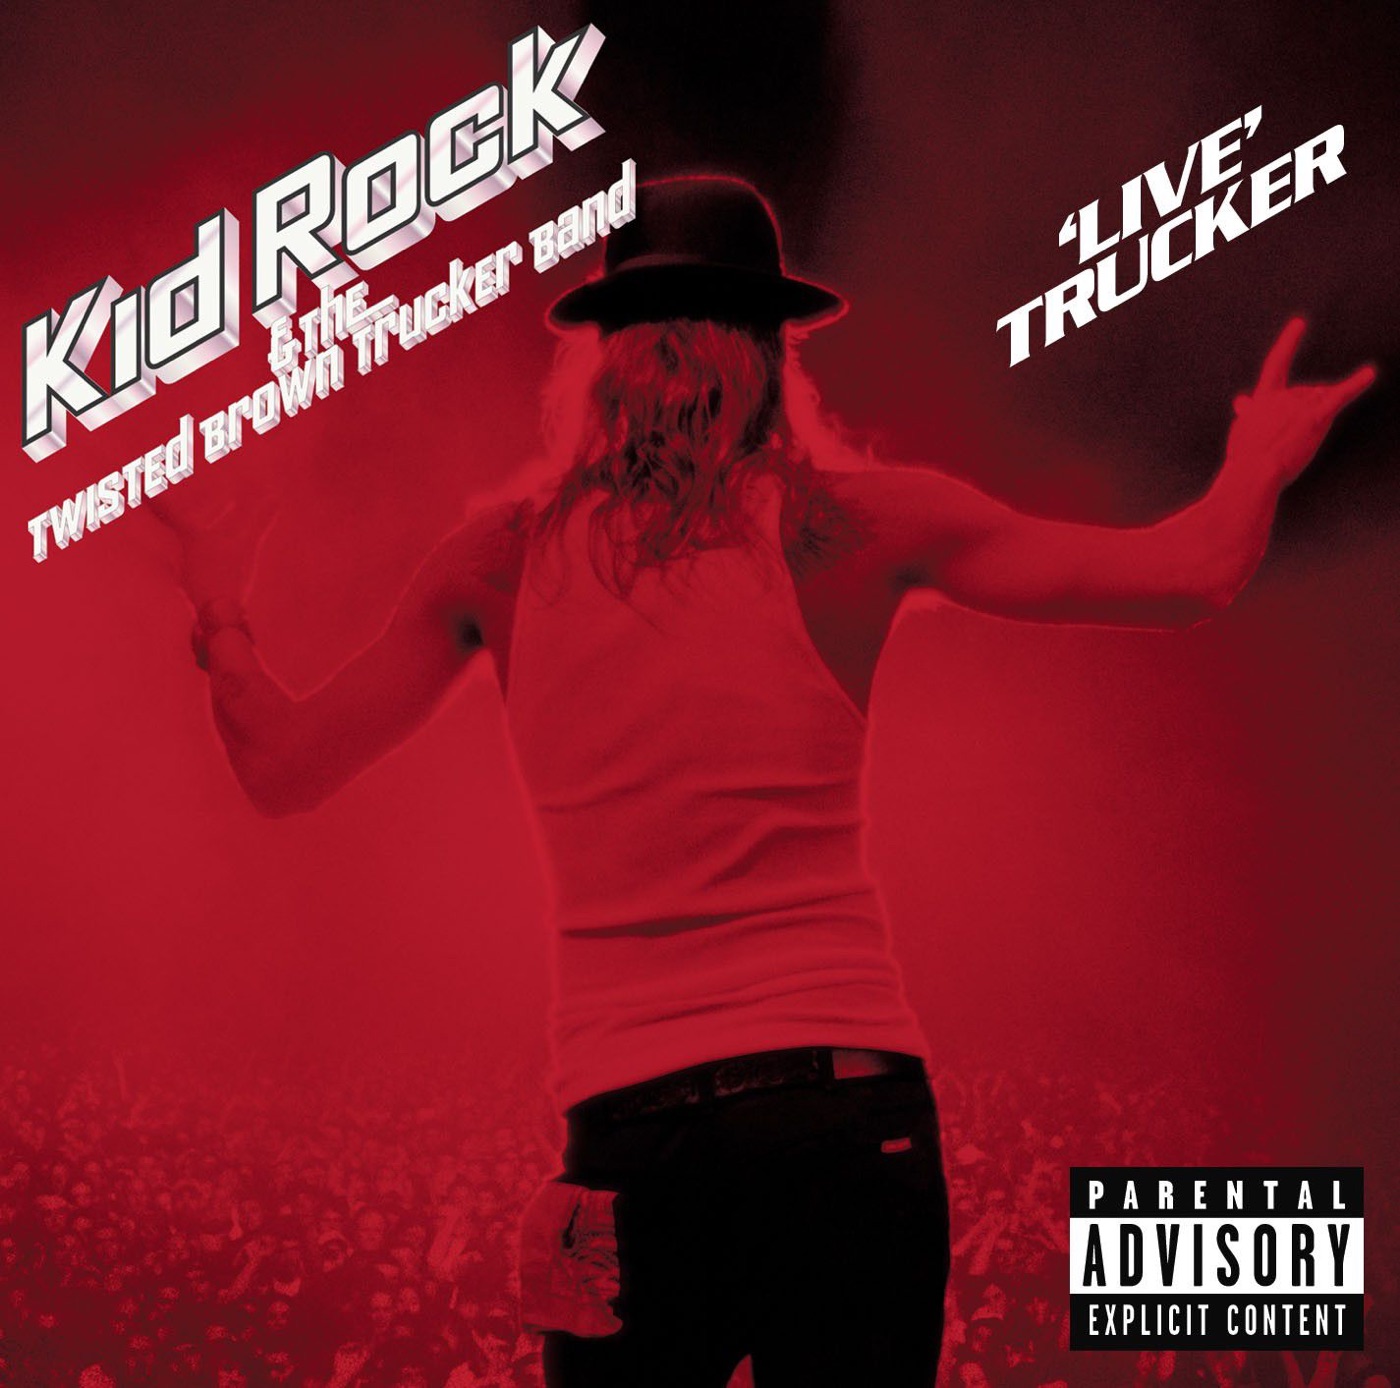 'Live' Trucker by Kid Rock, The Twisted Brown Trucker Band